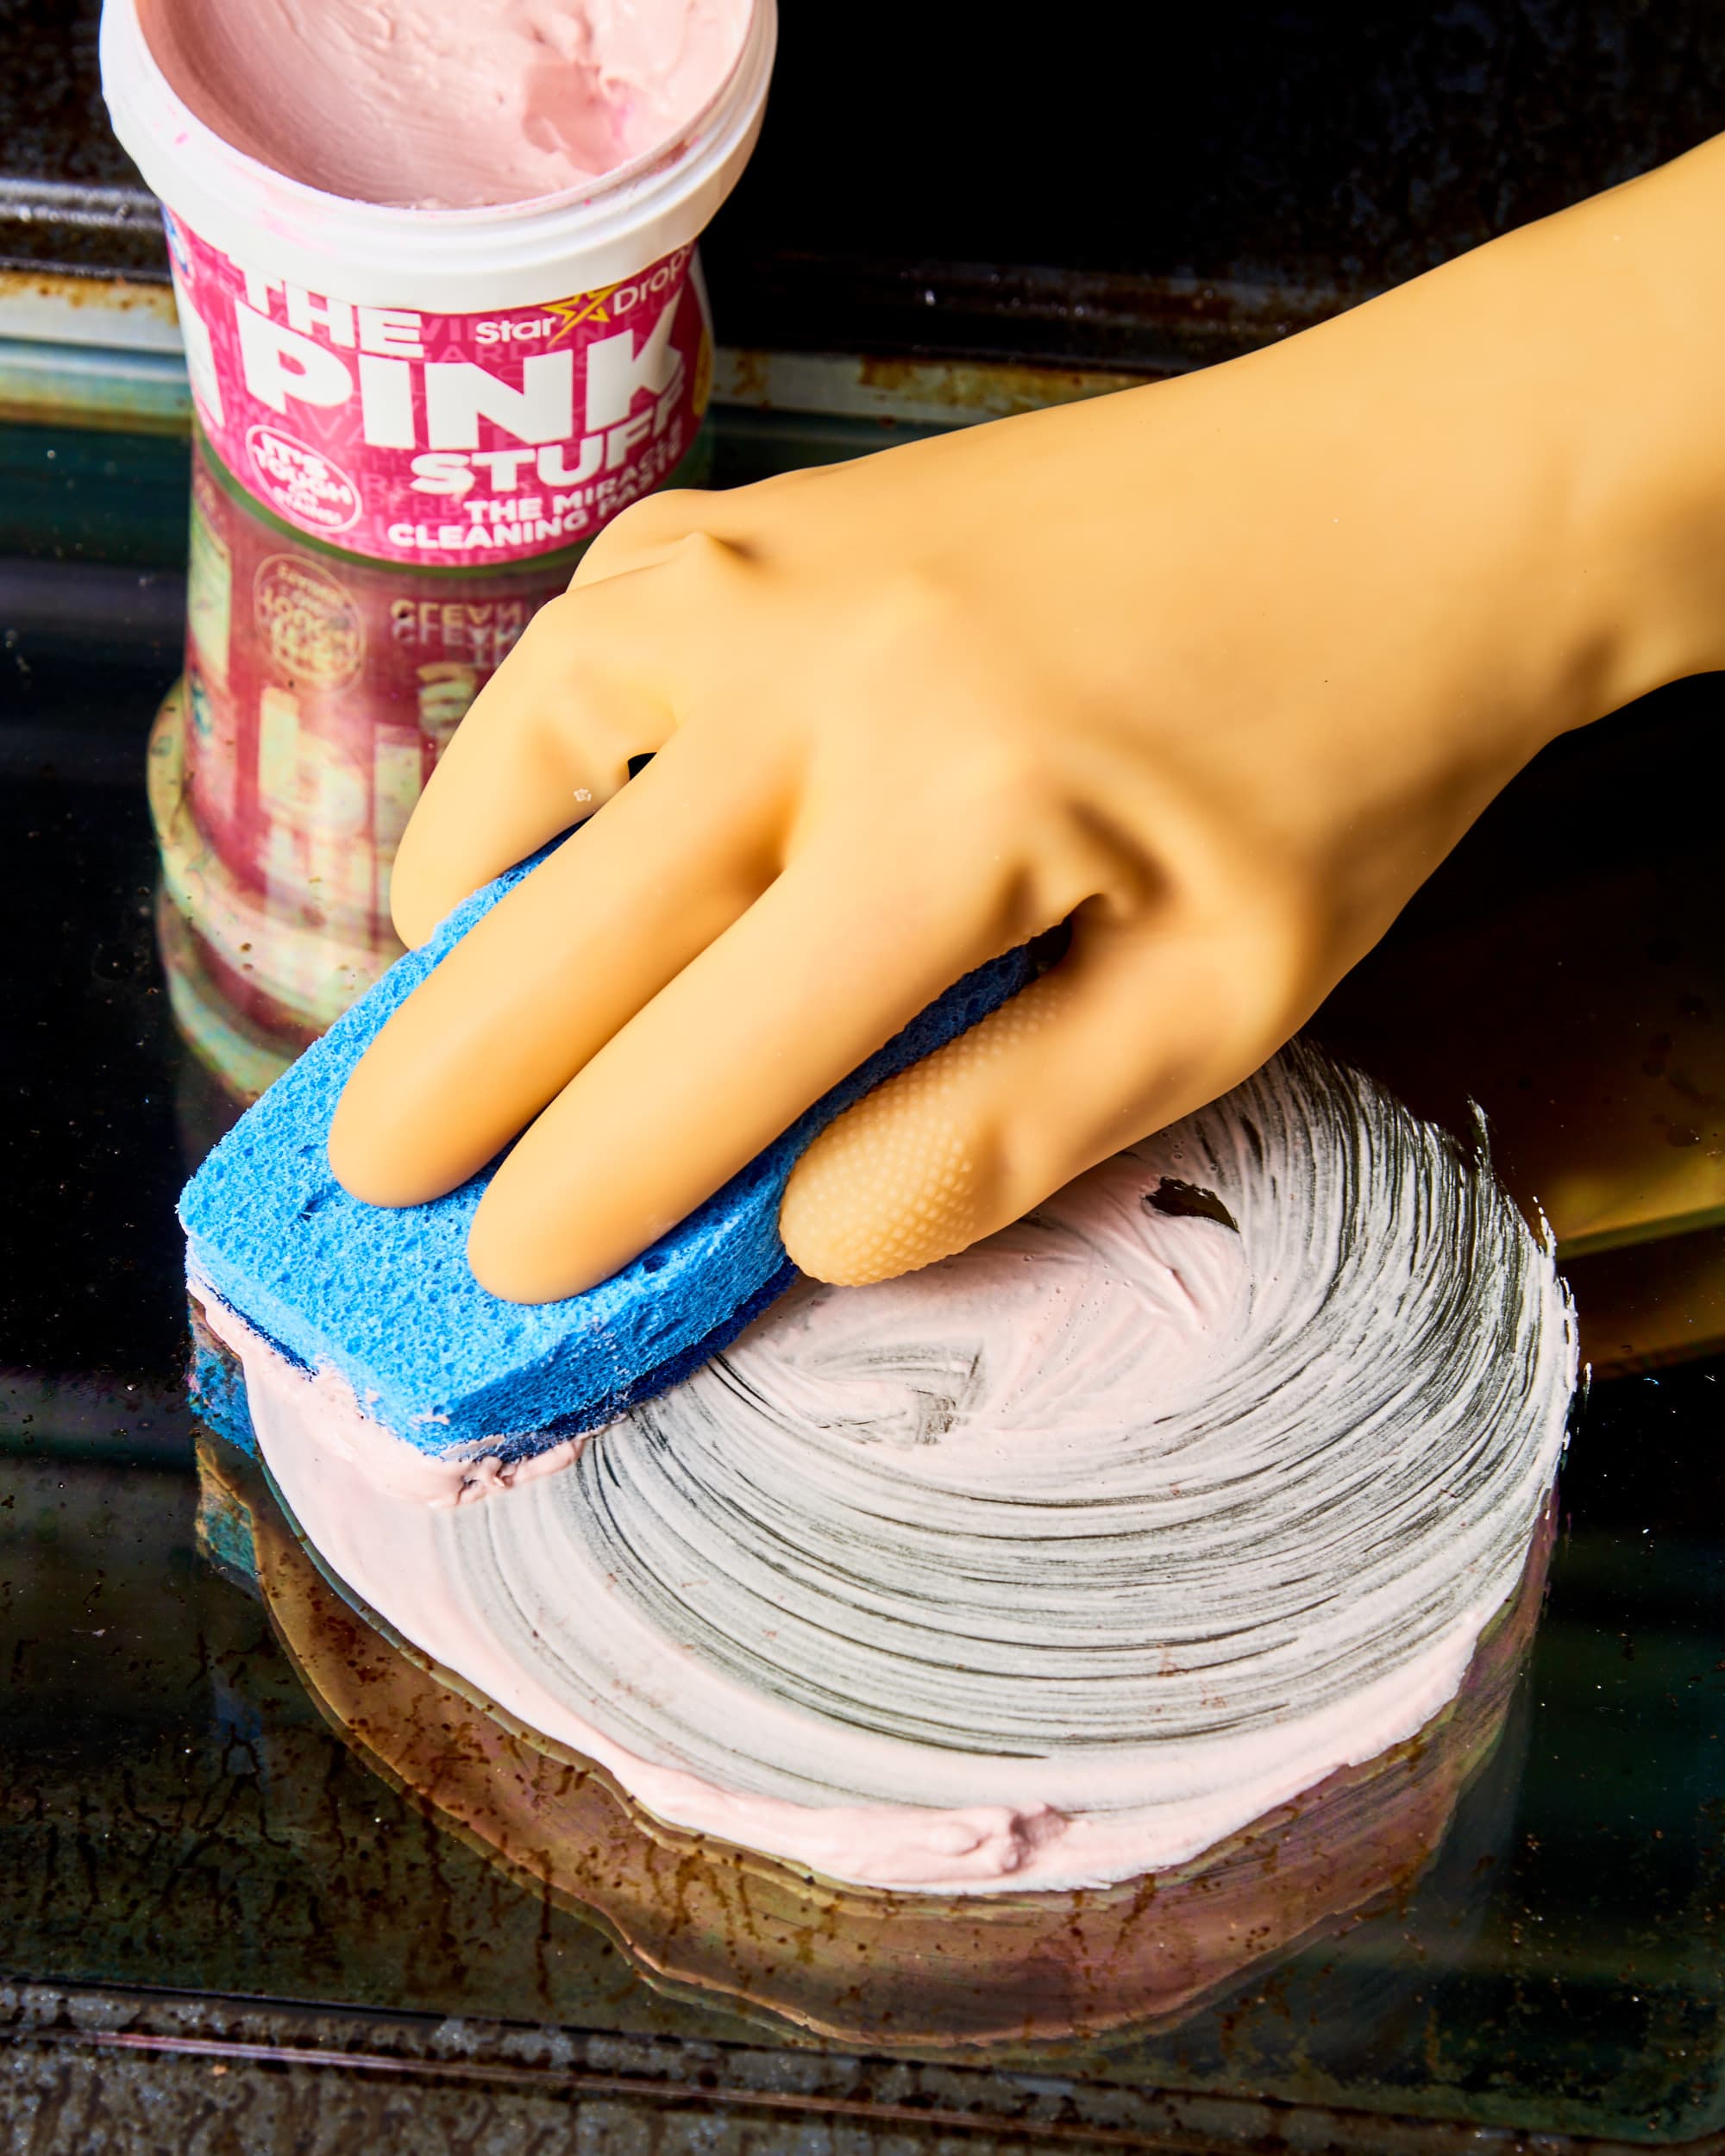 Pink Stuff Cleaning Paste Review 2022